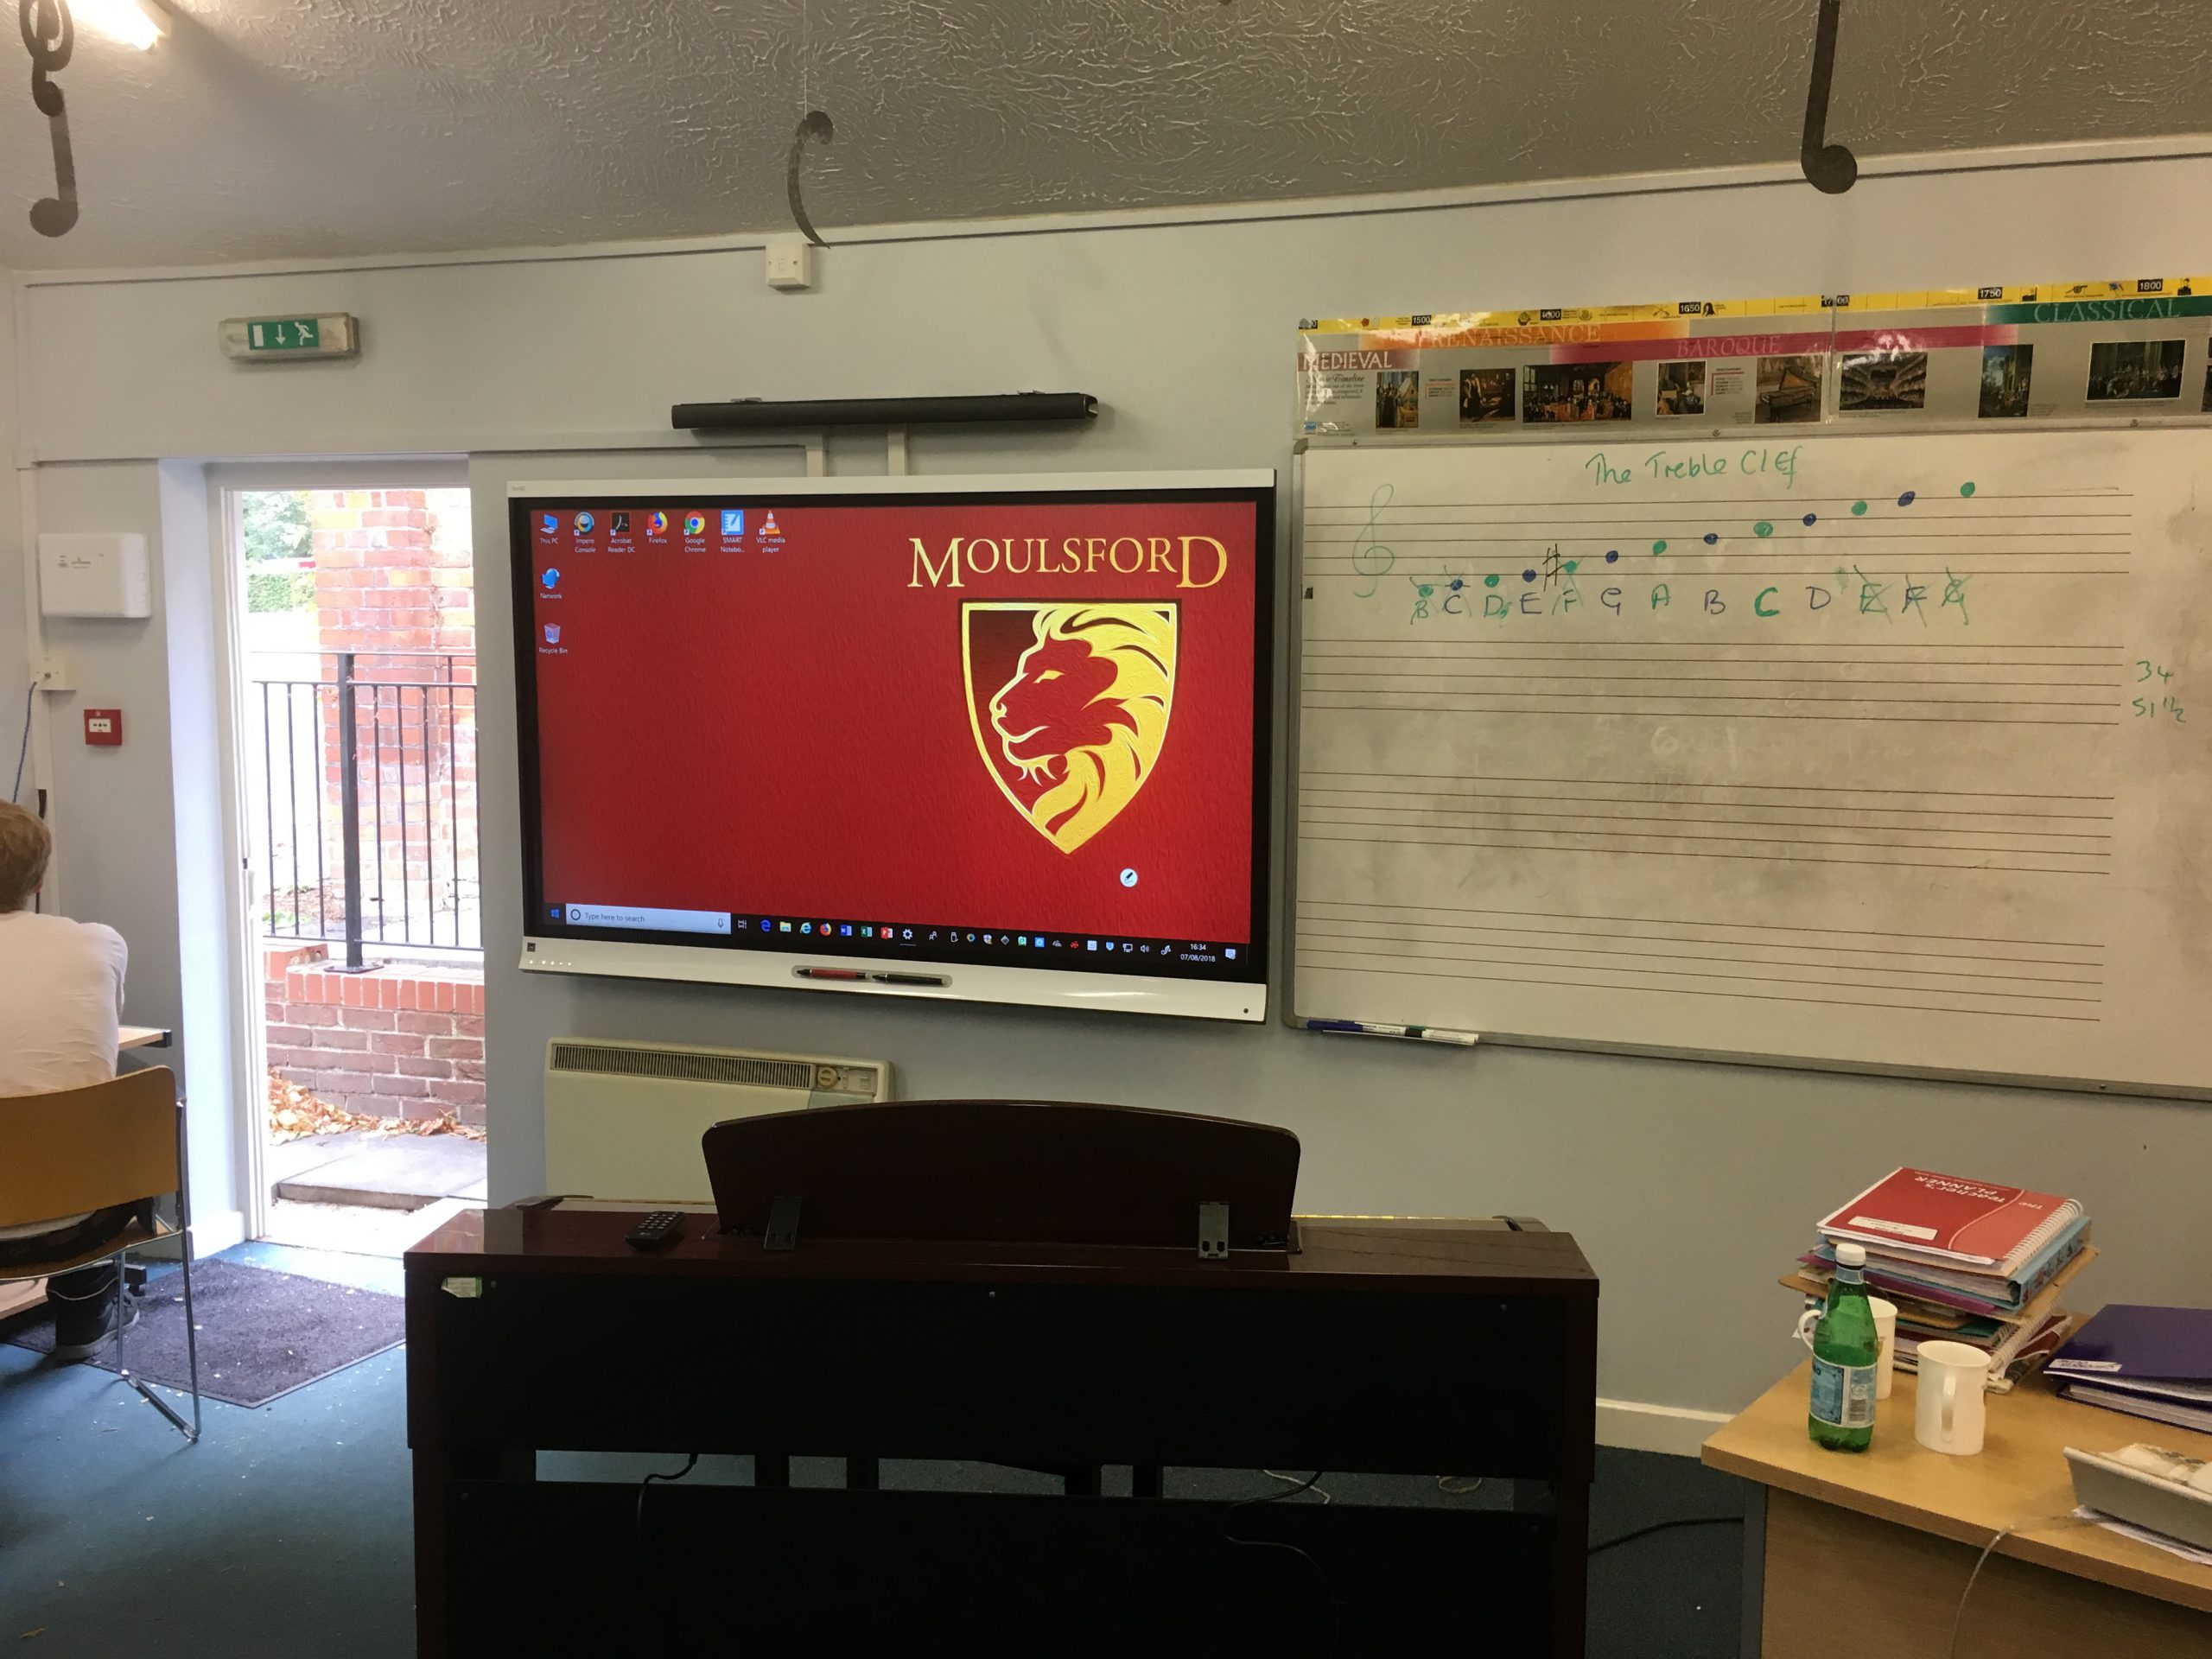 Interactive touch display at Moulsford School